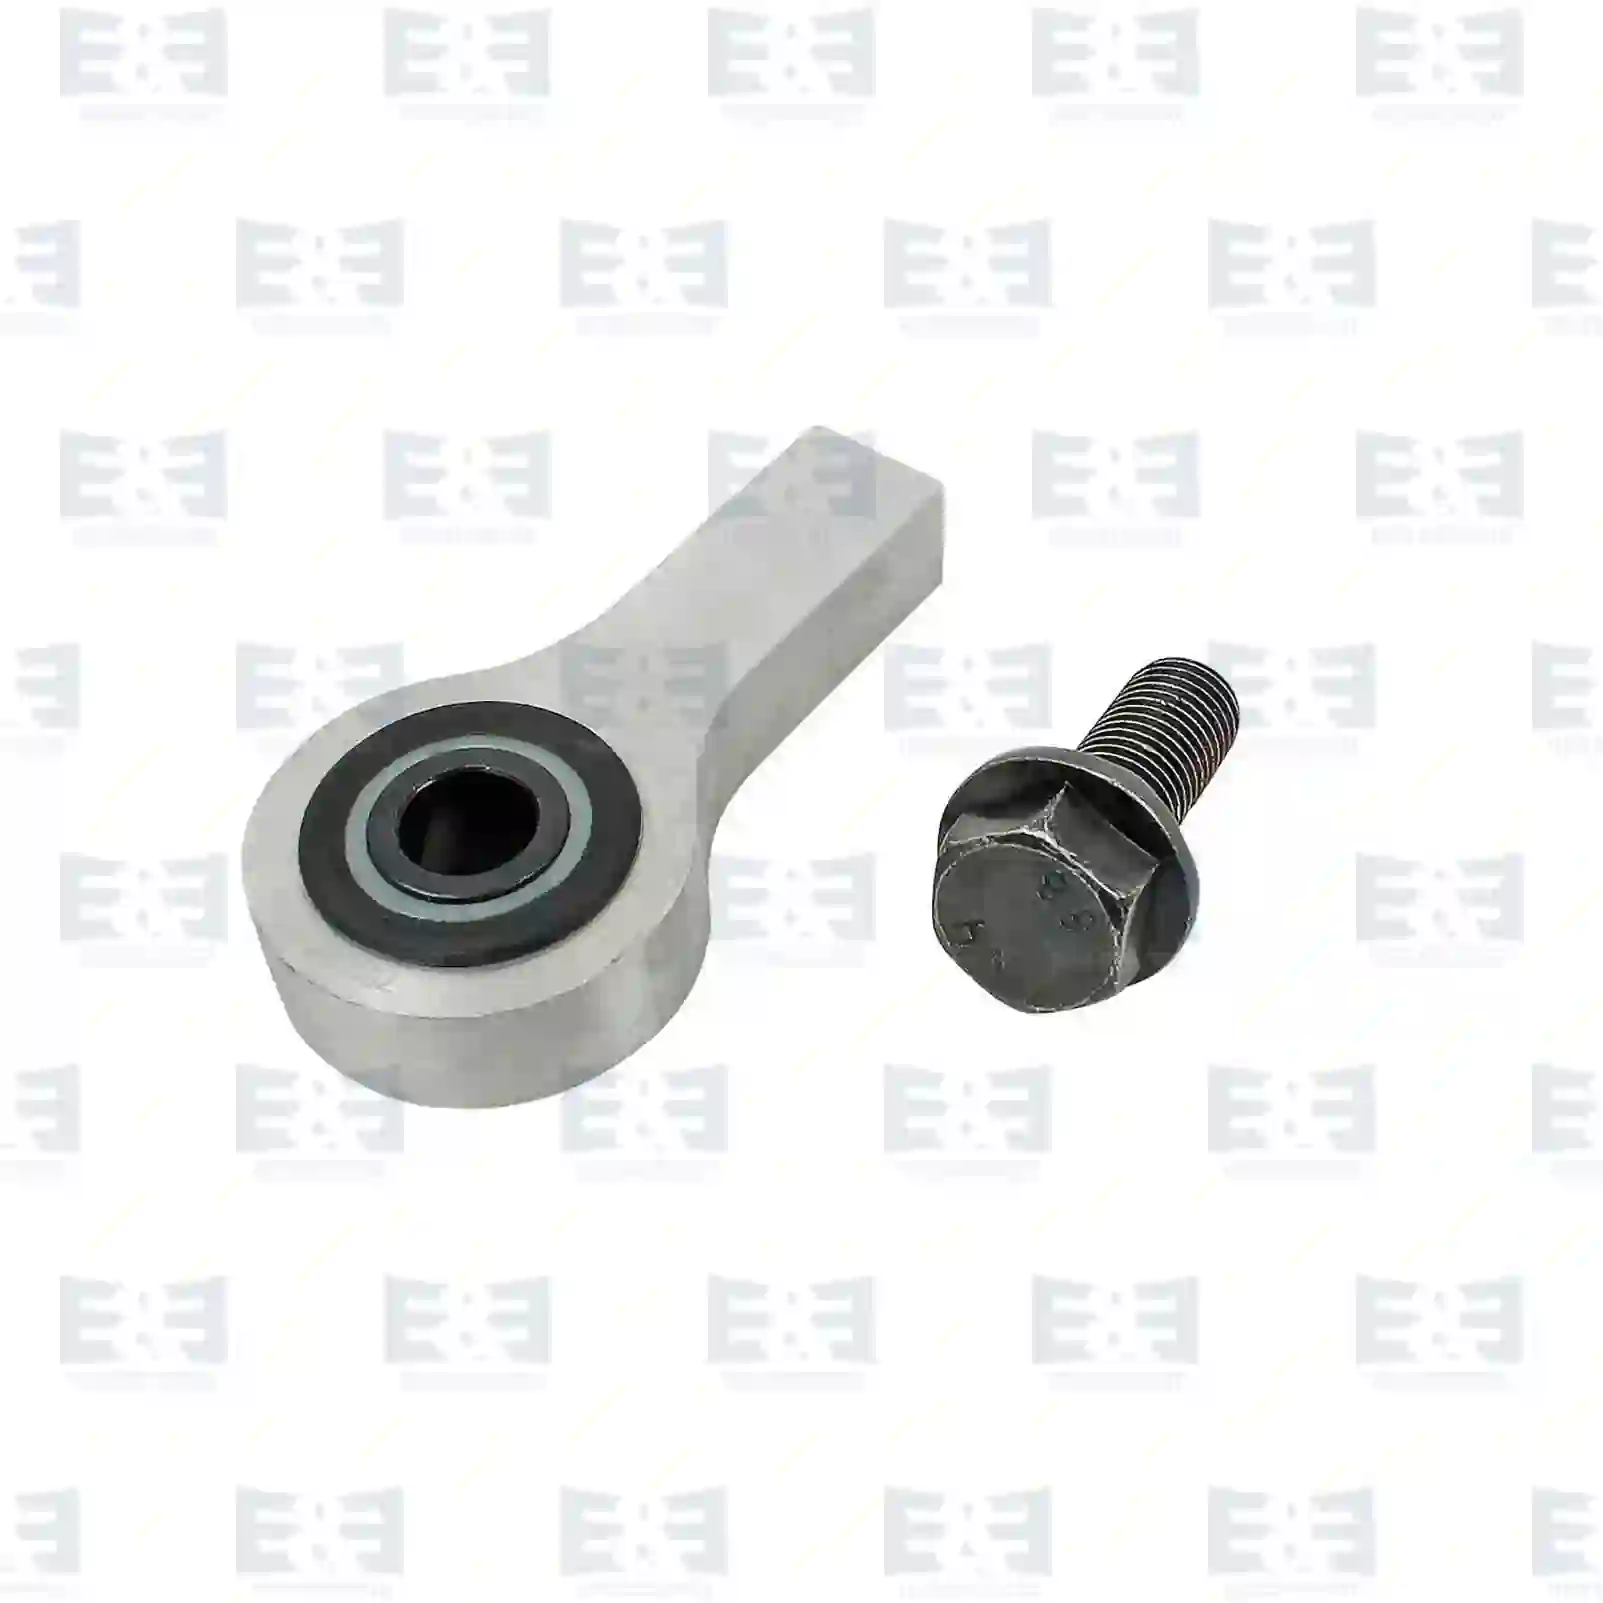 Bearing joint, complete with seal rings, 2E2274906, 2171716 ||  2E2274906 E&E Truck Spare Parts | Truck Spare Parts, Auotomotive Spare Parts Bearing joint, complete with seal rings, 2E2274906, 2171716 ||  2E2274906 E&E Truck Spare Parts | Truck Spare Parts, Auotomotive Spare Parts